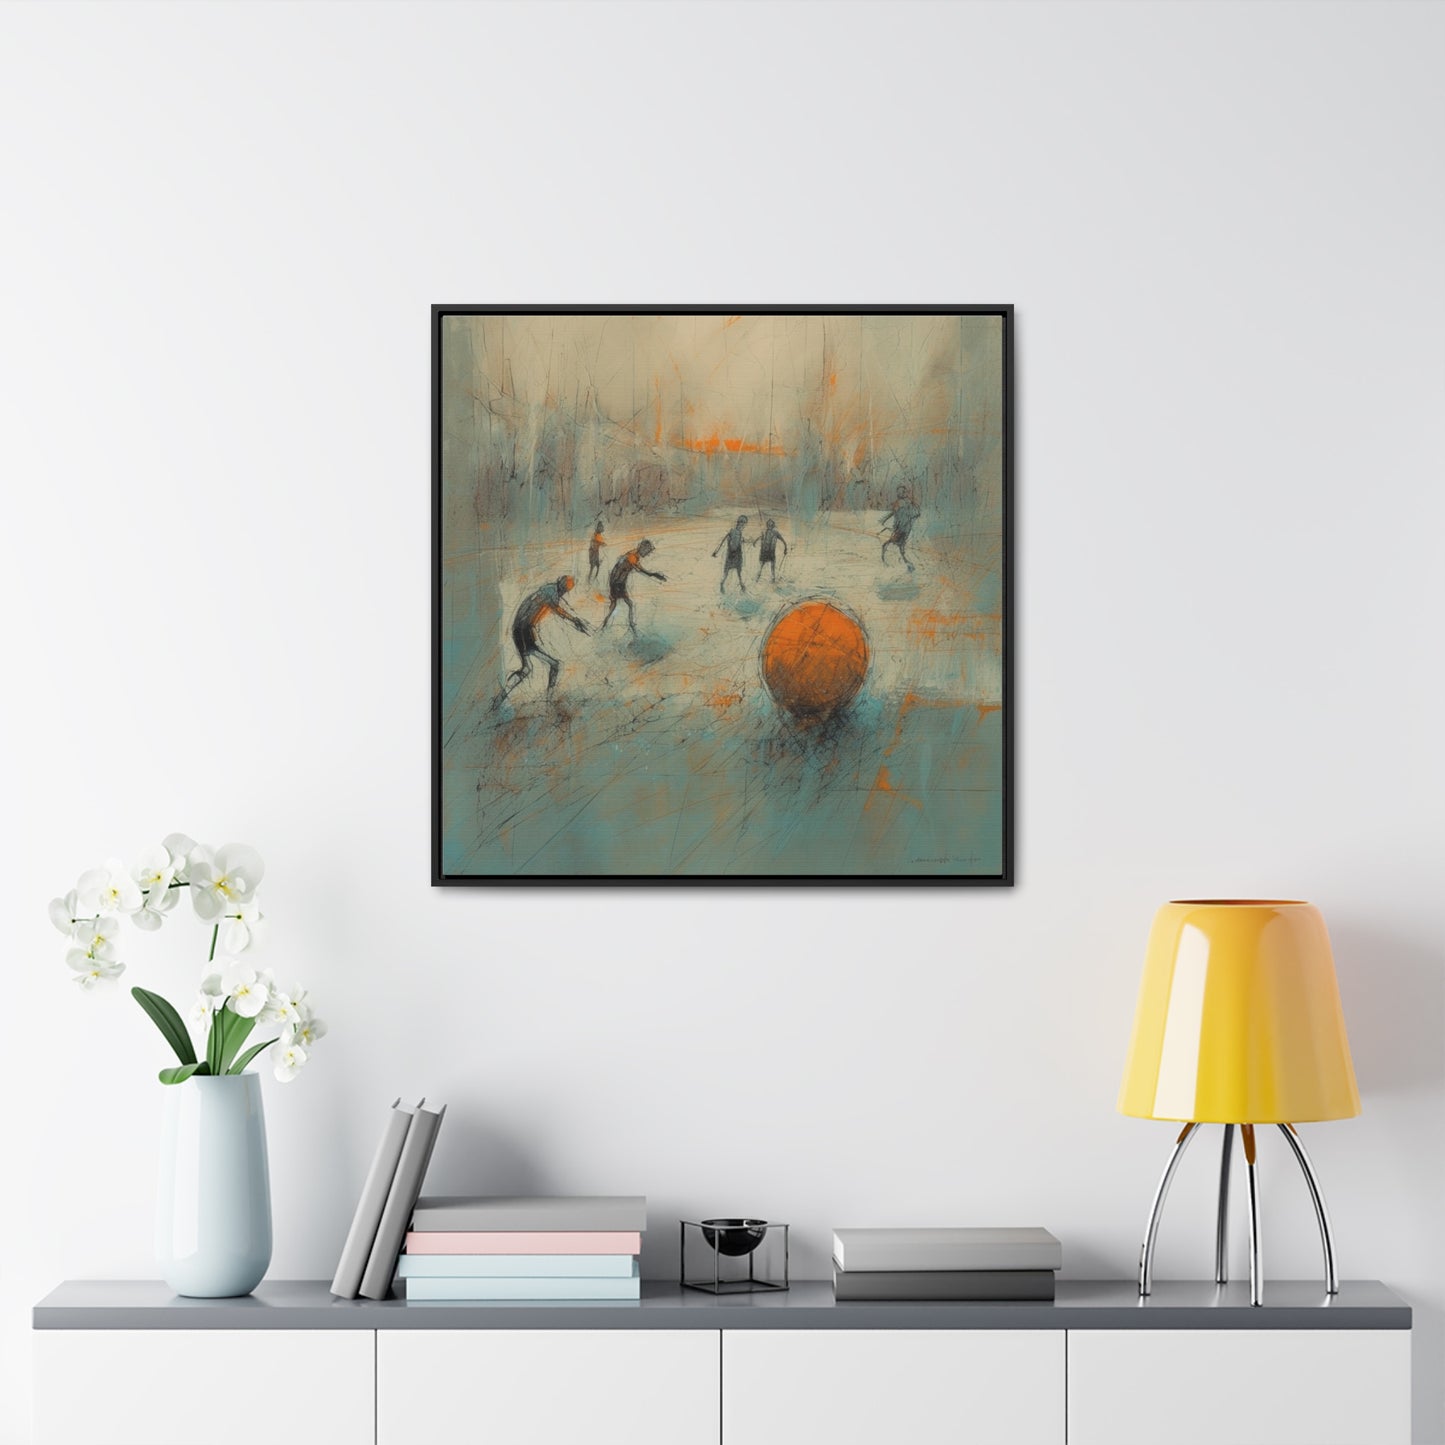 Childhood 33, Gallery Canvas Wraps, Square Frame